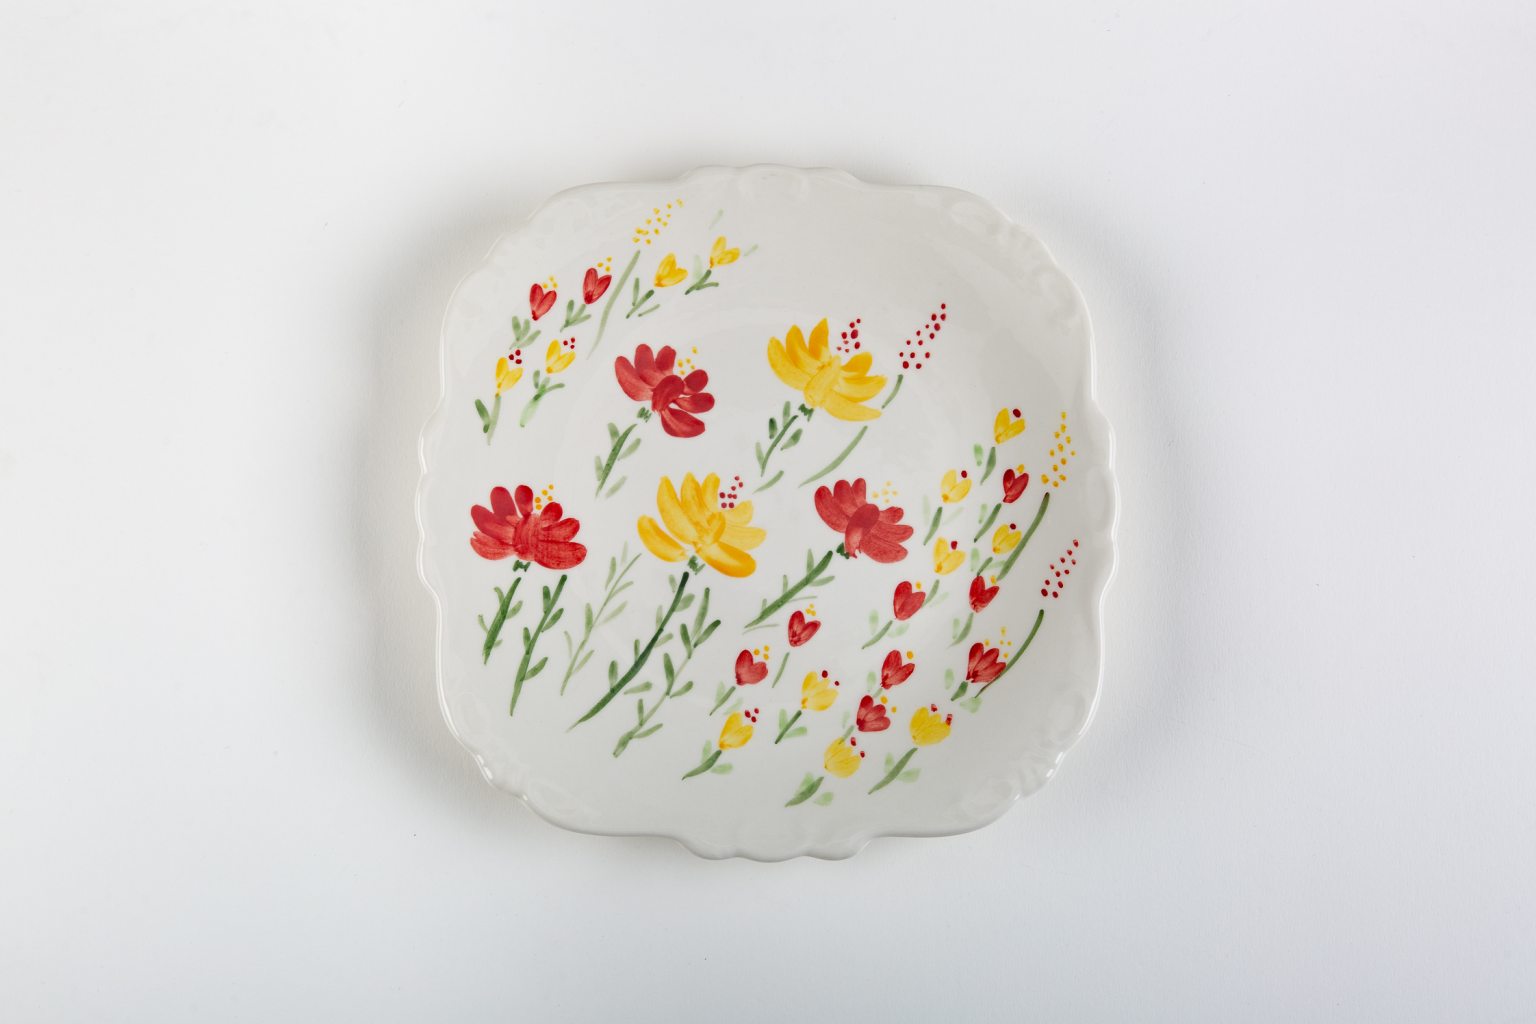 Handmade large platter with yellow & red flowers